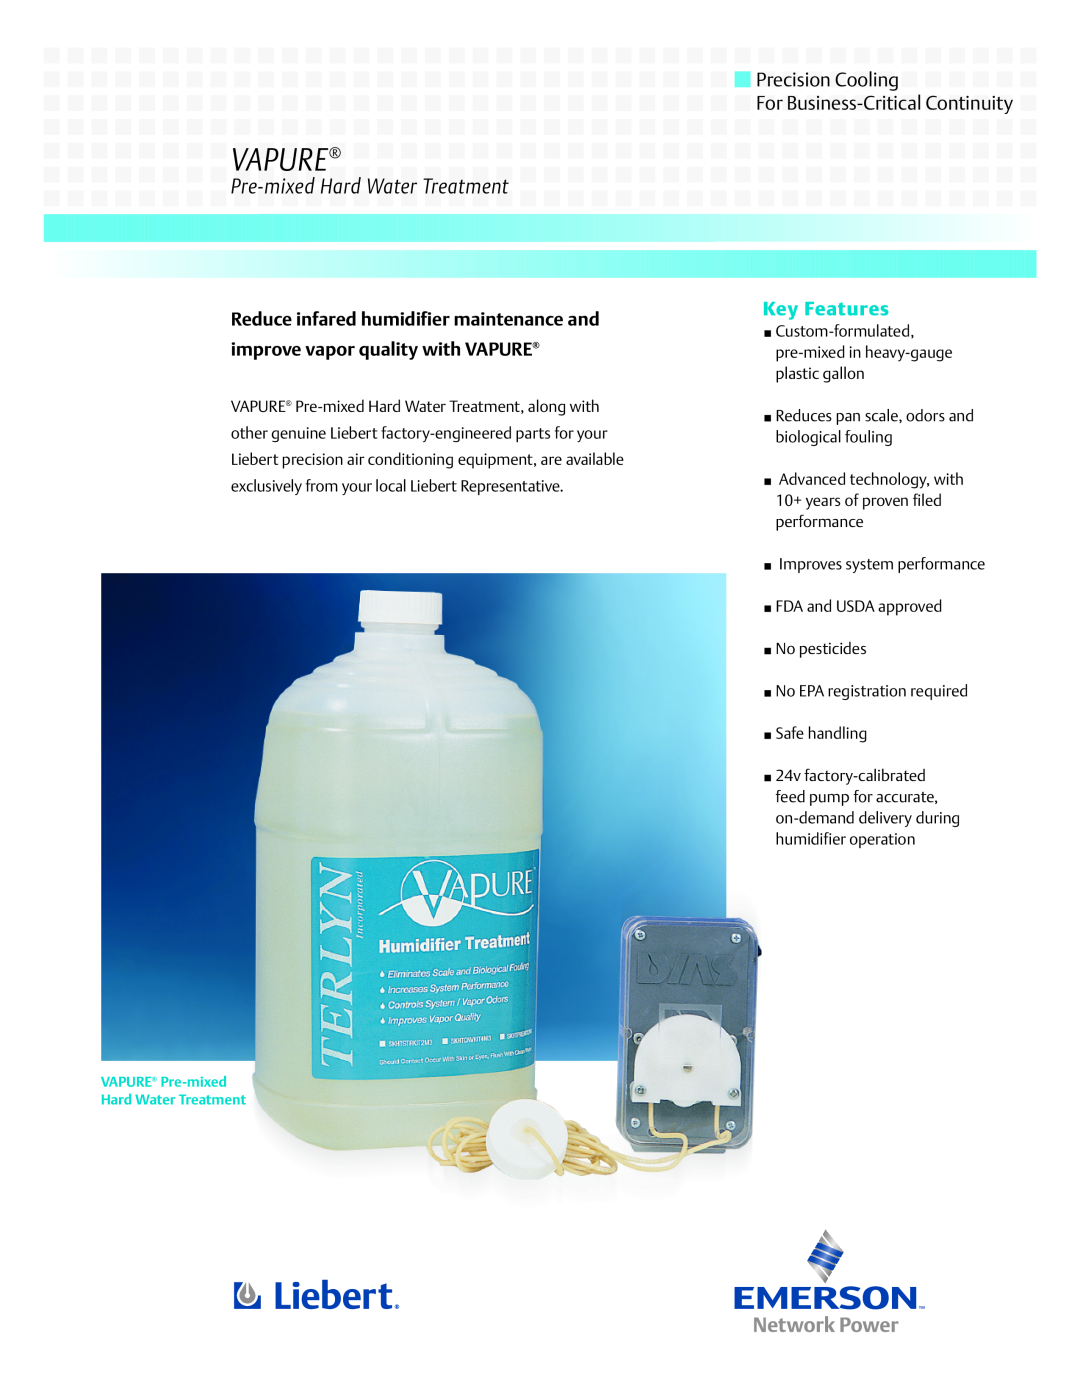 Liebert VAPURE manual Pre-mixedHard Water Treatment, Reduces pan scale, odors and biological fouling, Safe handling 